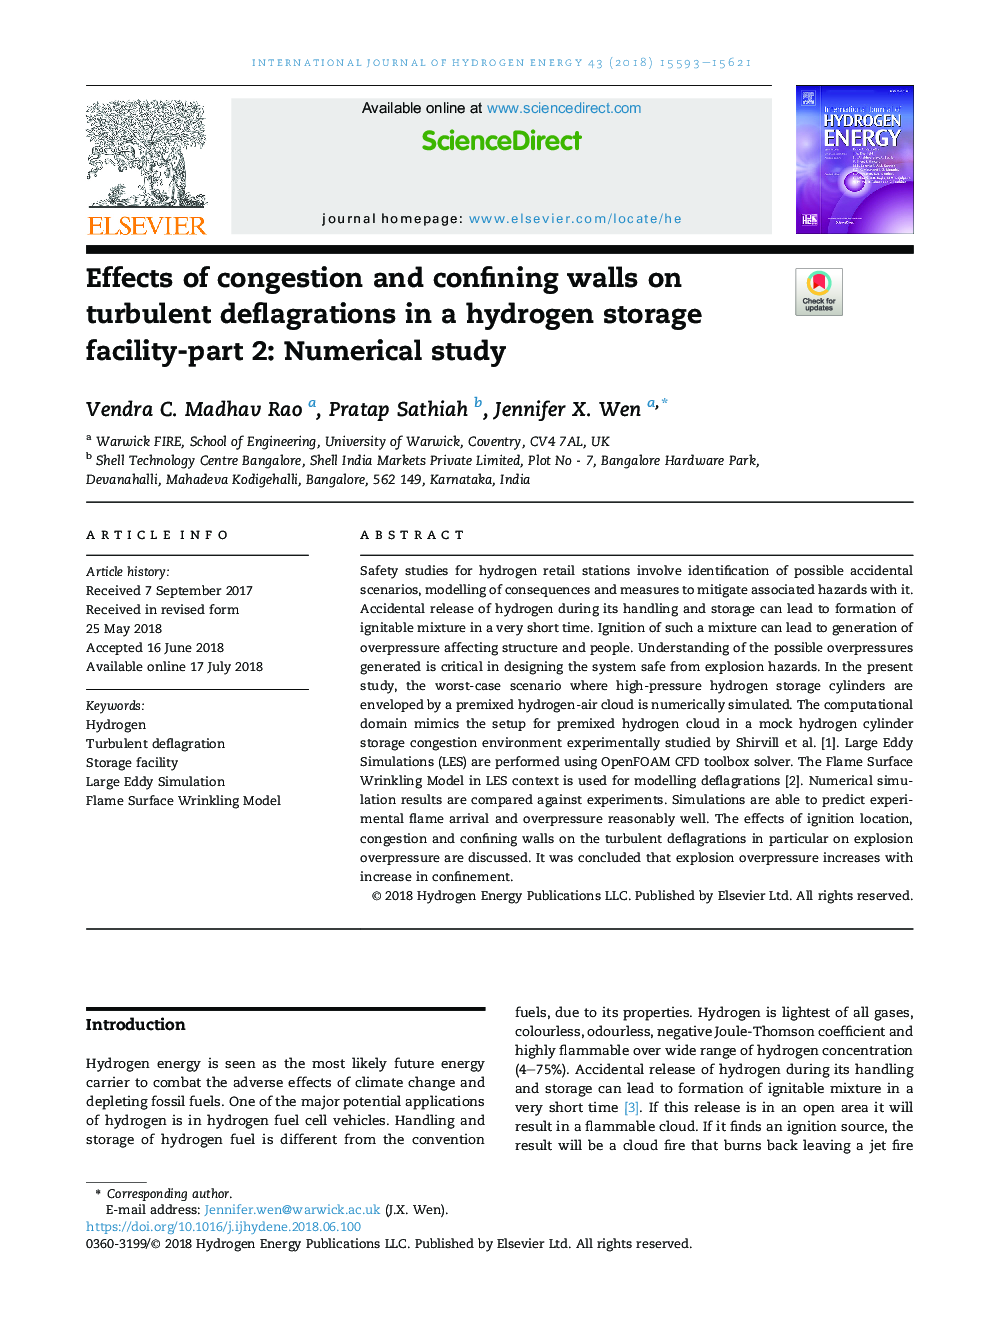 Effects of congestion and confining walls on turbulent deflagrations in a hydrogen storage facility-part 2: Numerical study